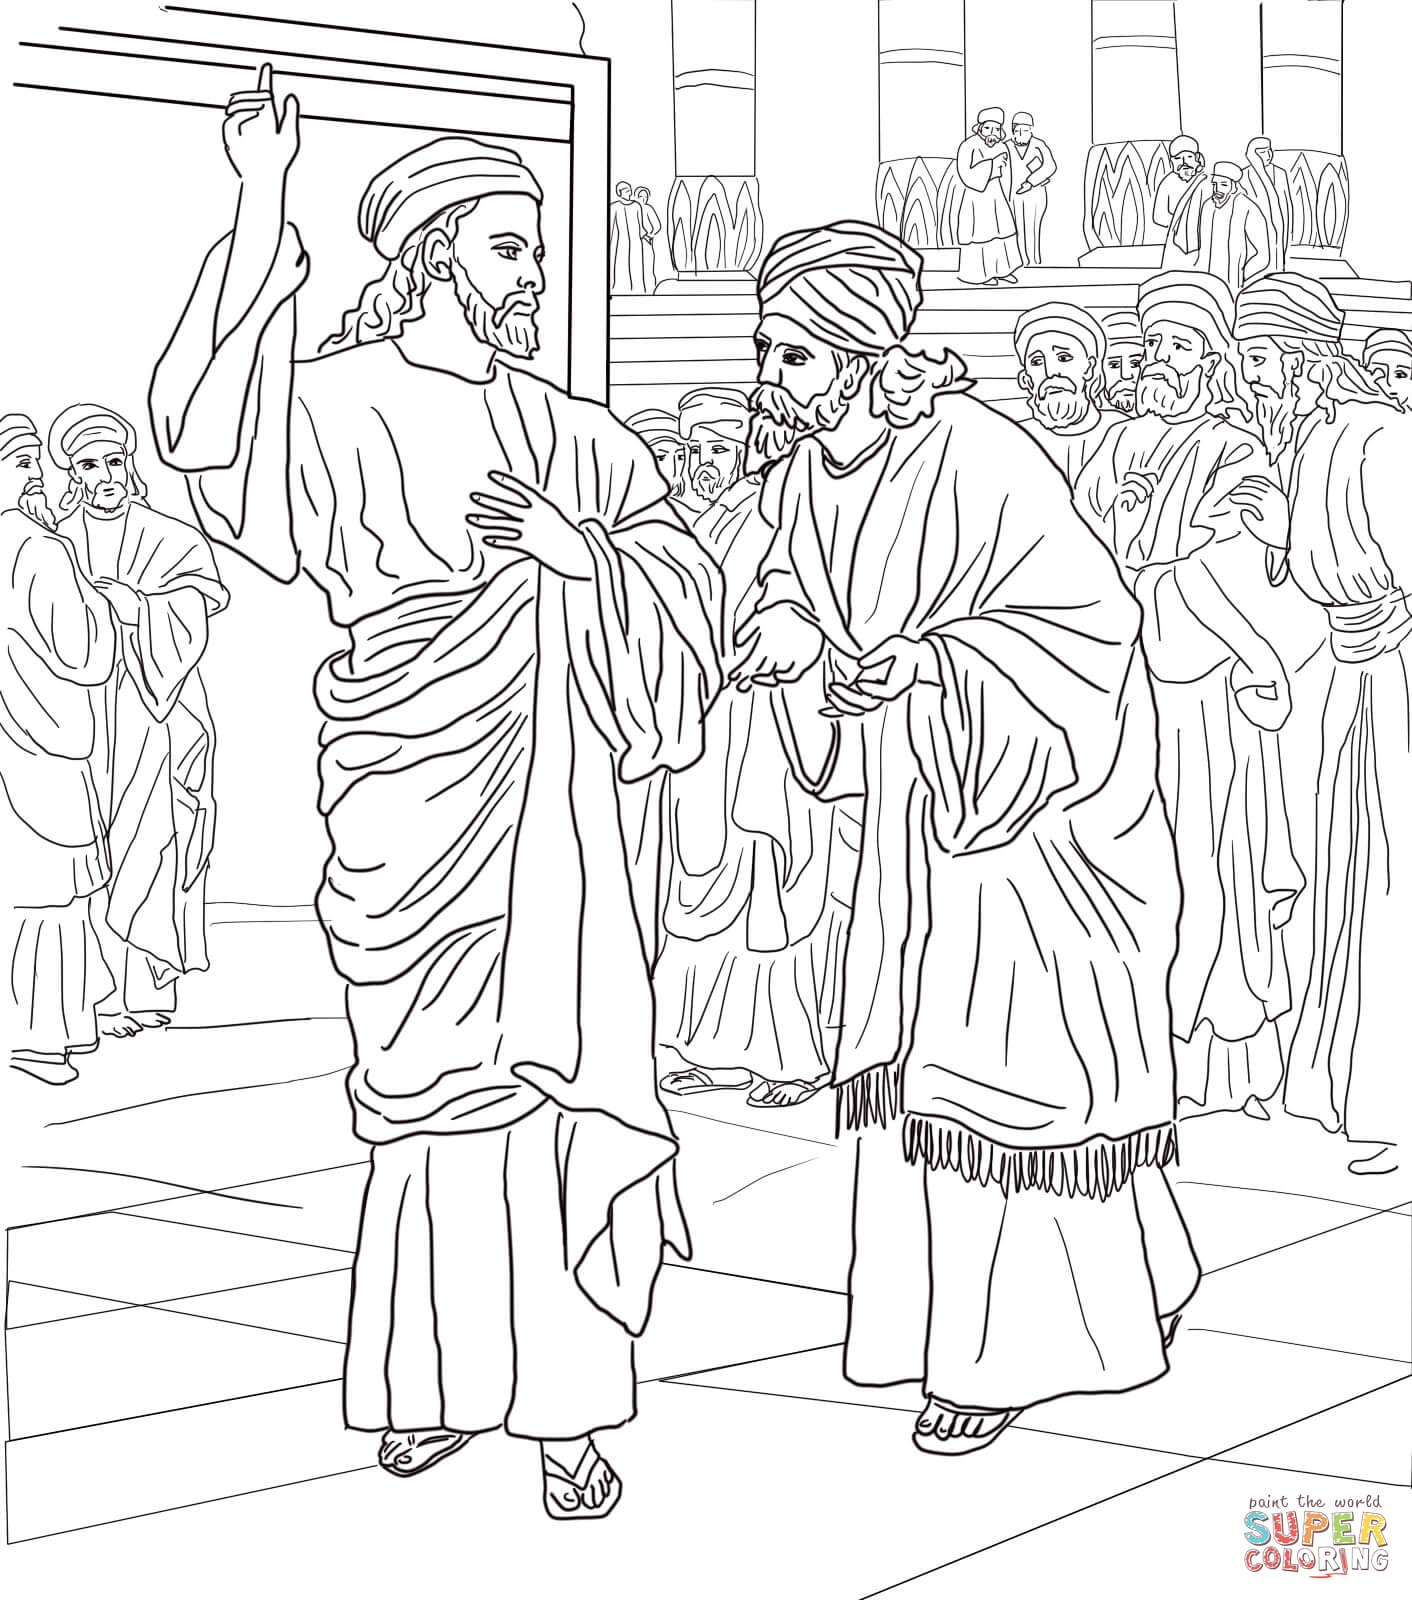 Pharisees and sadducees question jesus coloring page free printable coloring pages